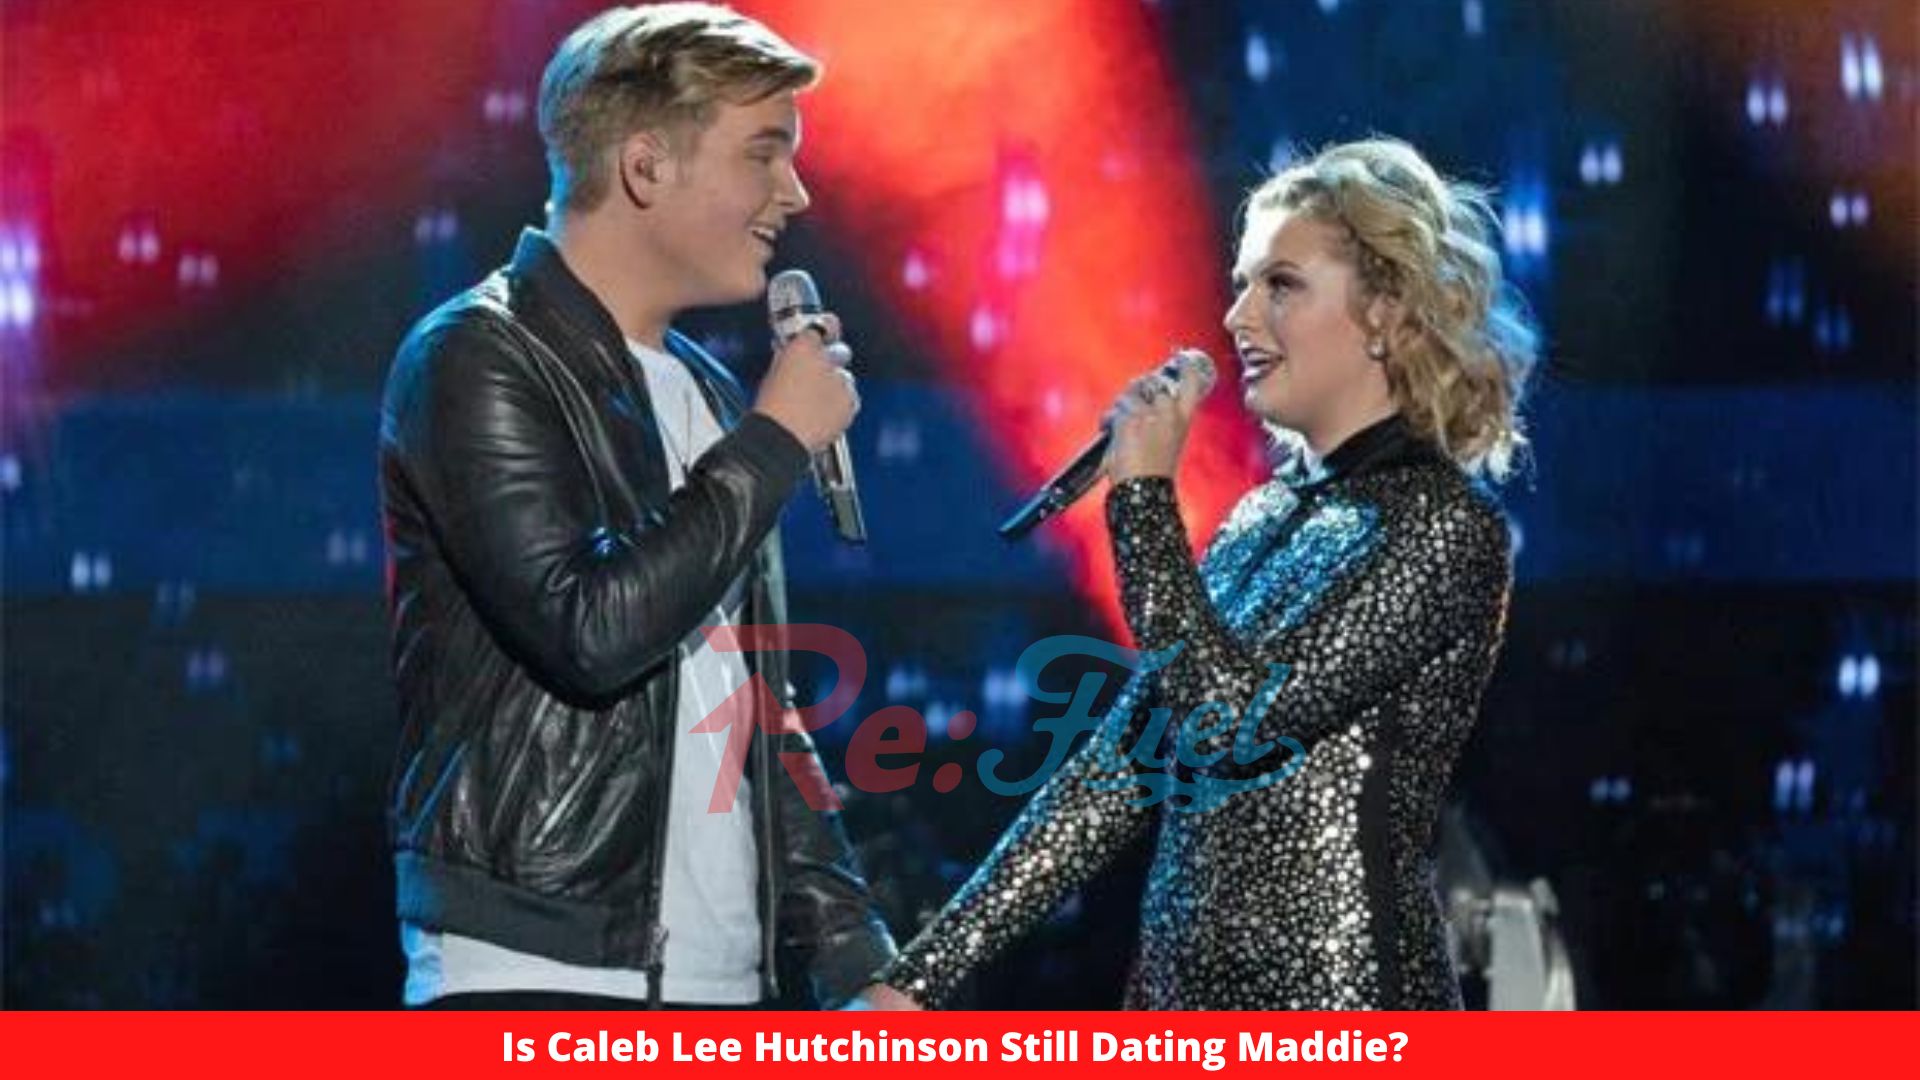 Is Caleb Lee Hutchinson Still Dating Maddie? Complete Relationship Timeline!